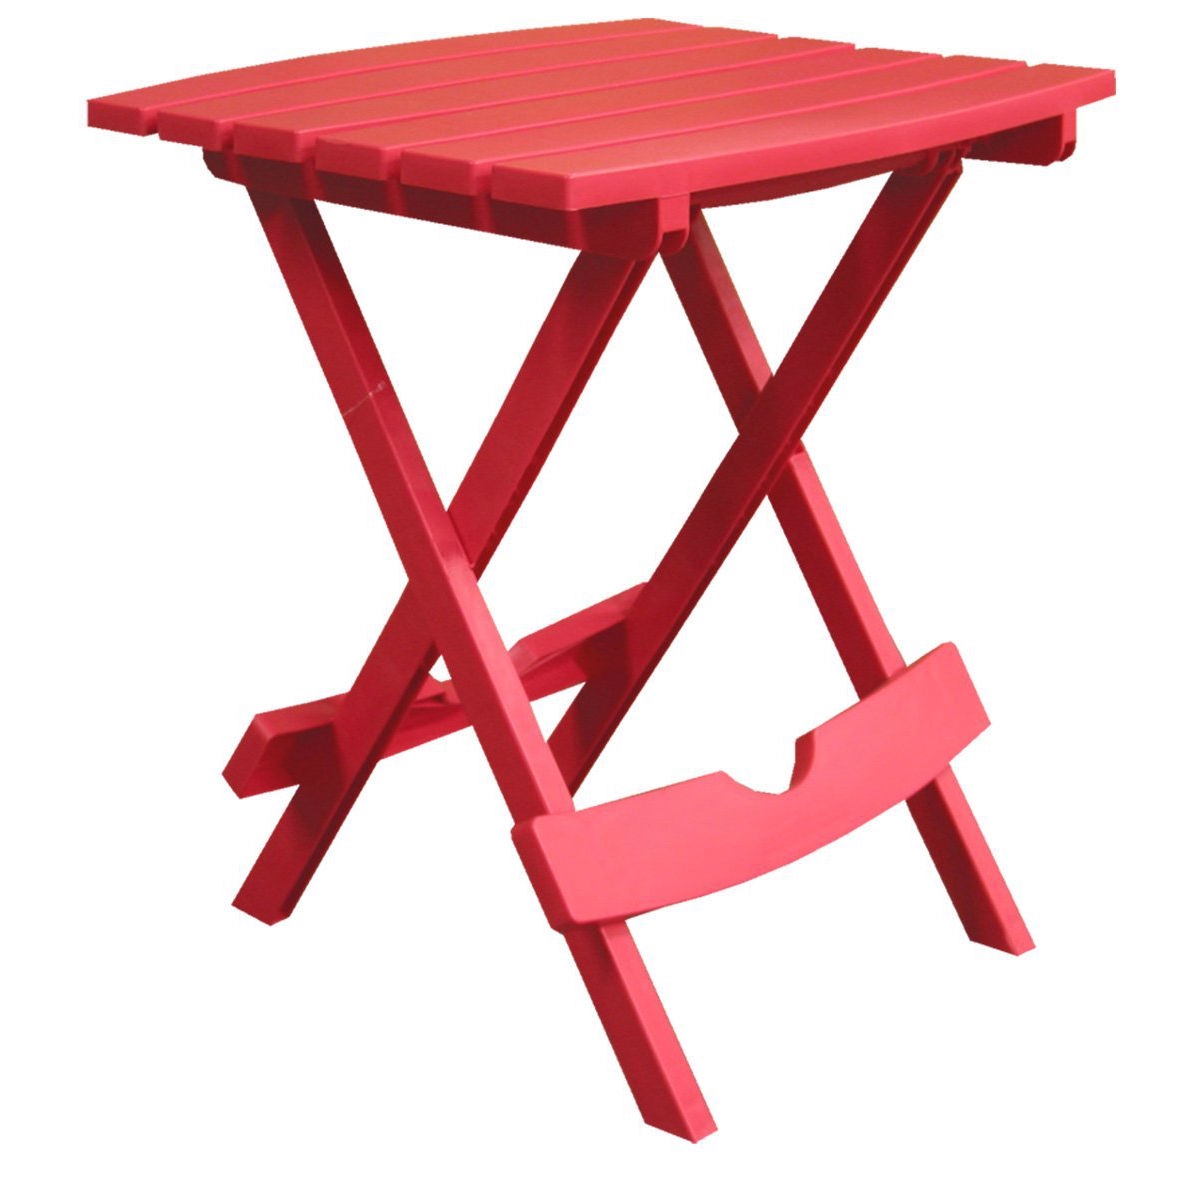 Folding Side Table for Outdoor Patio Lawn in Cherry Red Durable Resin